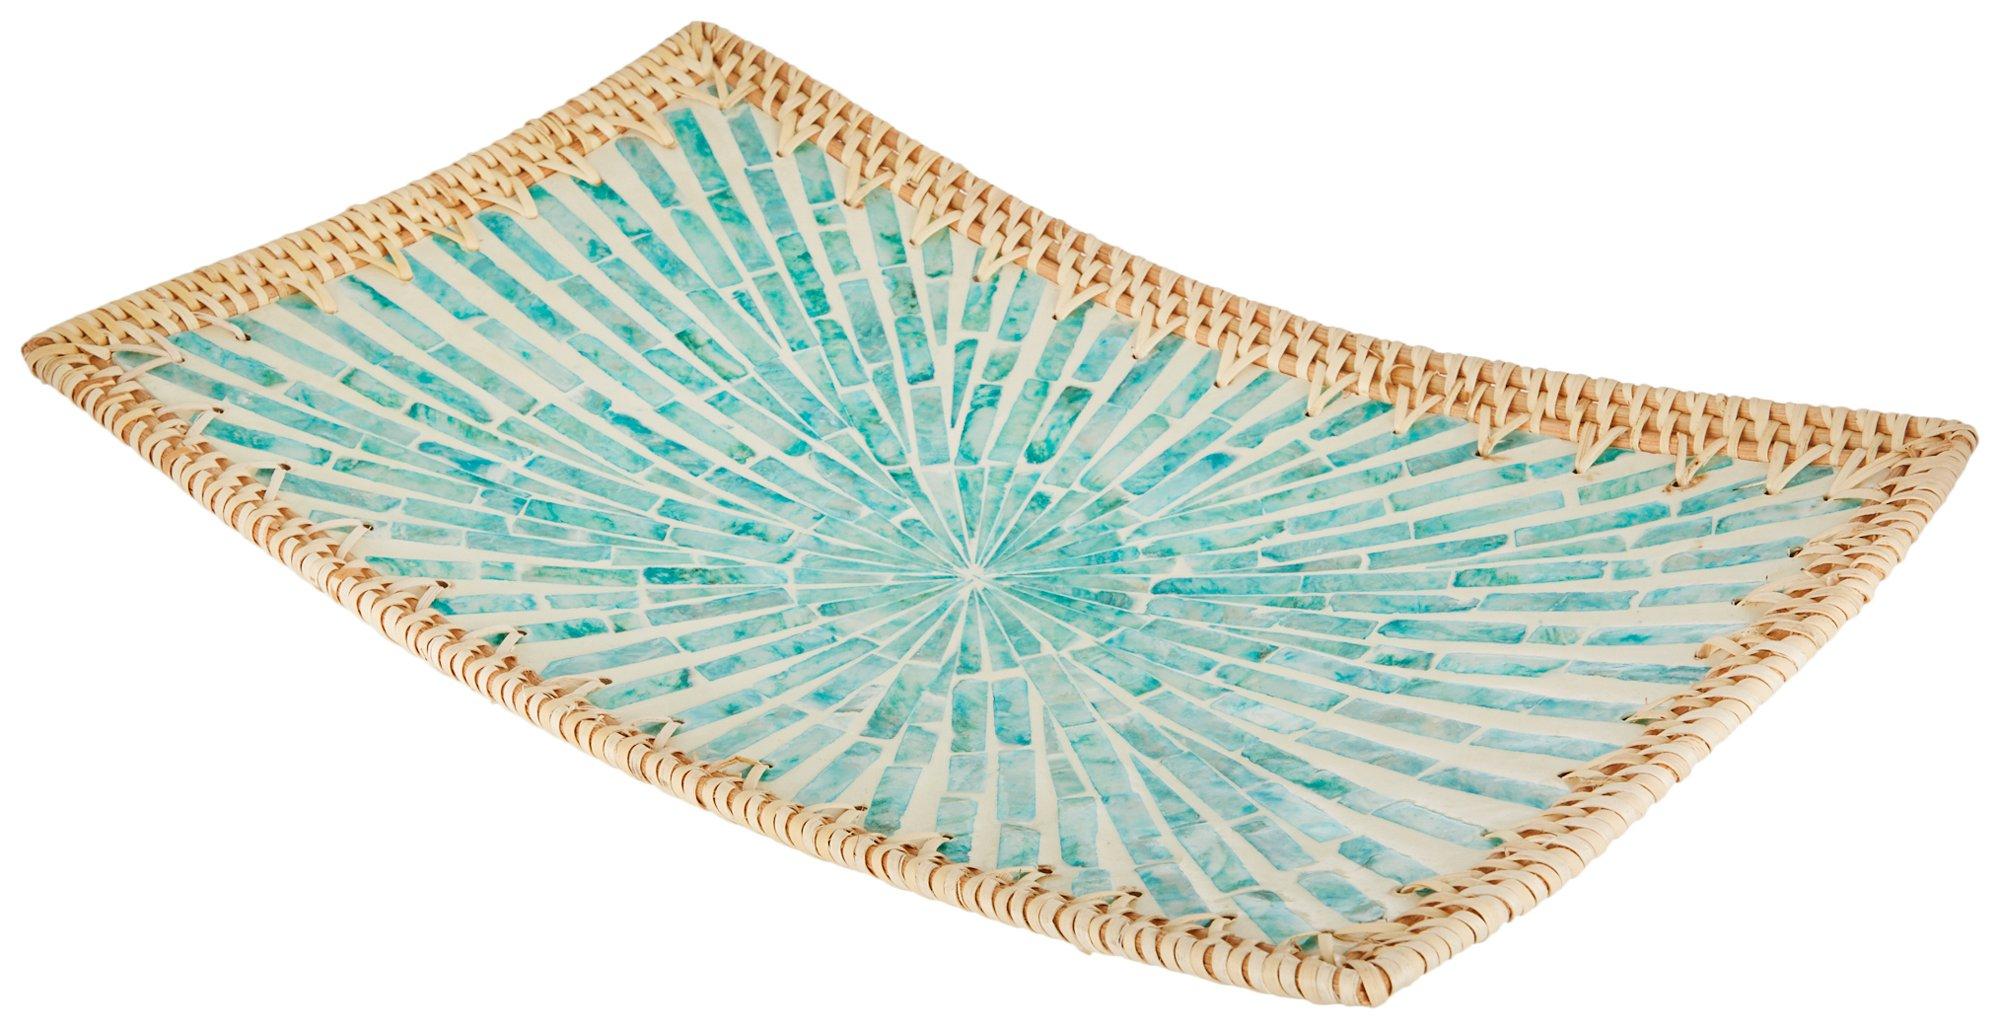 Young's 10x16 Wicker Serving Tray